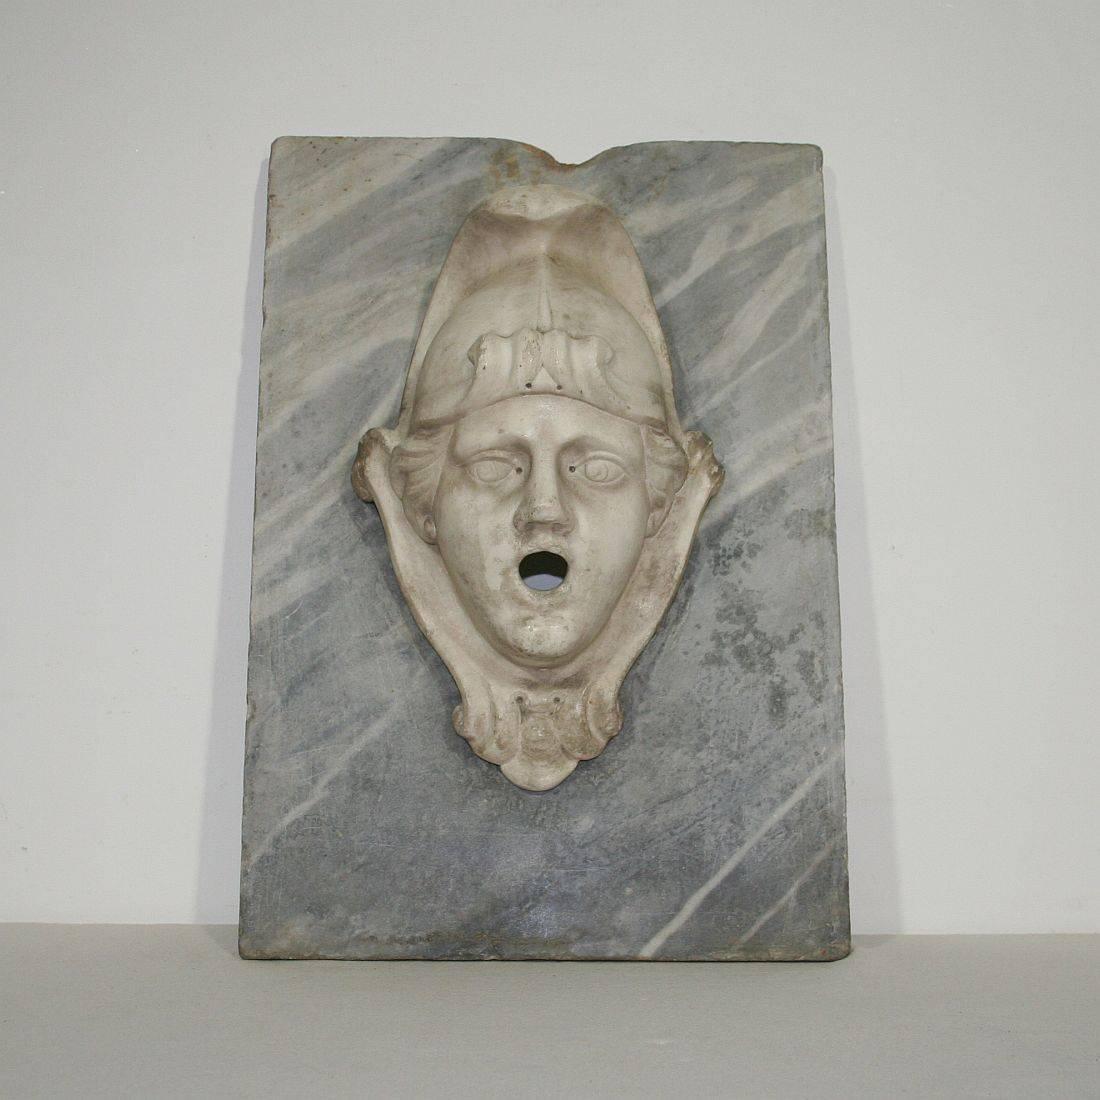 Spectacular and unique Carrera marble fountain head on a grey marble plaque.
Italy, circa 1650-1750
Weathered, small losses and old repairs.
More pictures are available on request.